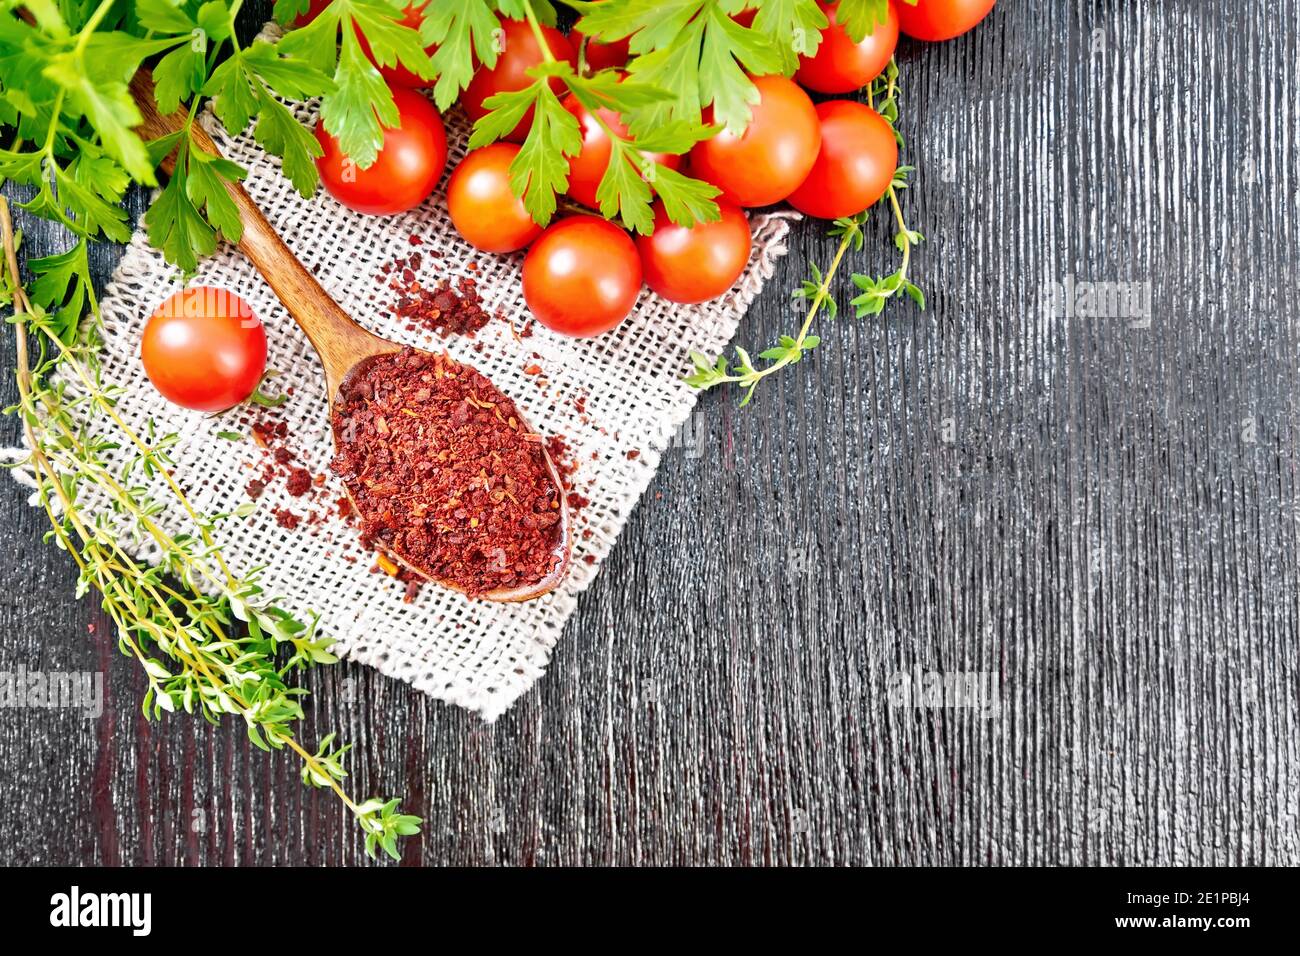 Dried tomato flakes in a spoon on burlap, fresh small tomatoes, parsley and thyme on dark wooden board background from above Stock Photo